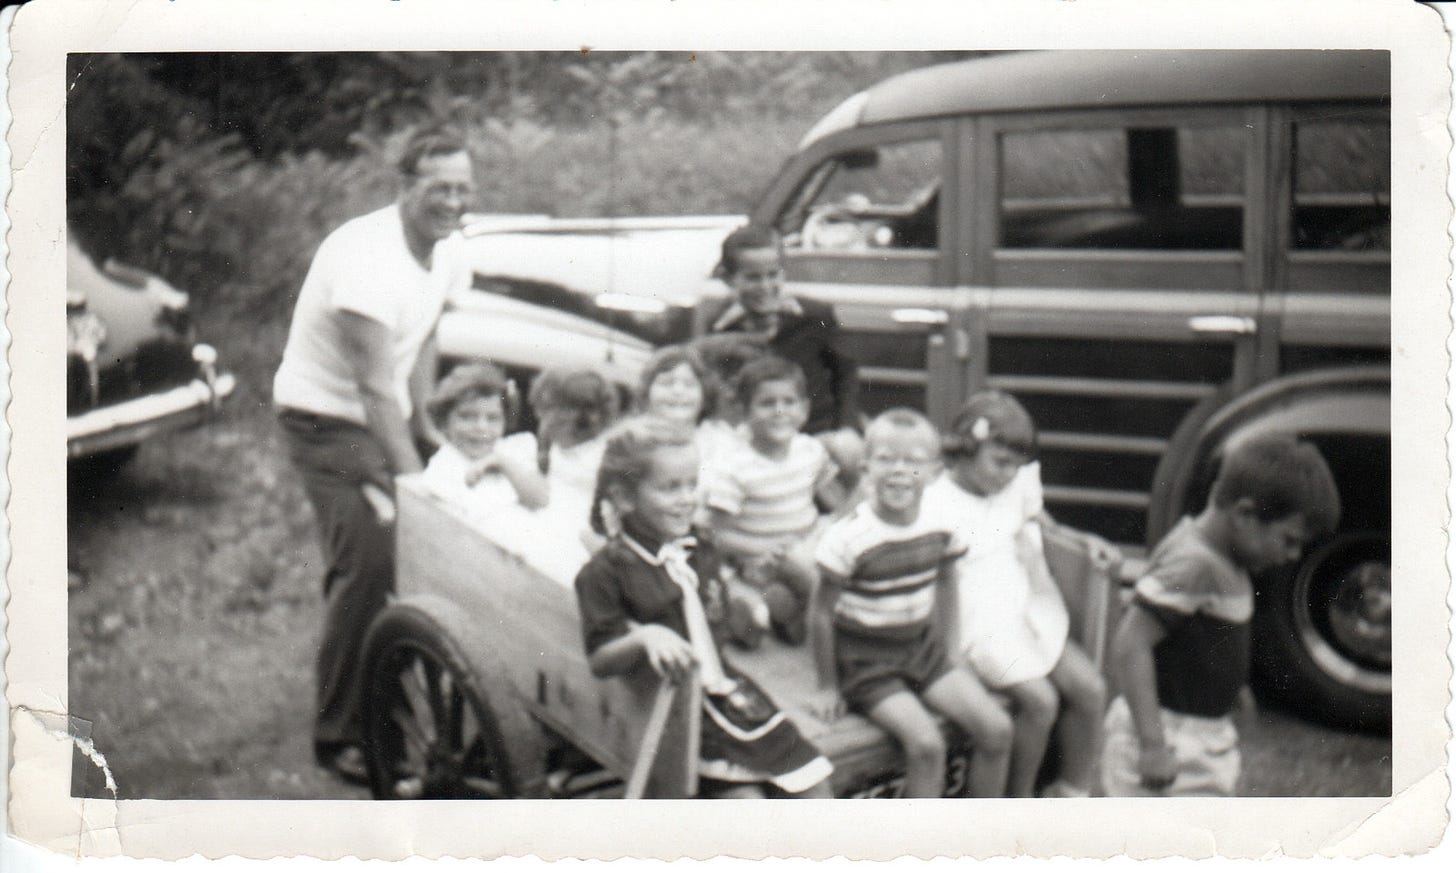 Cathy Daly, Jack Daly, John Dempsey, Peter Mann, Steven Dempsey, Tom Dempsey, Wendy Mann  in Parker Ward's Trailer in front of 1946 Pontiac Station Wagon.